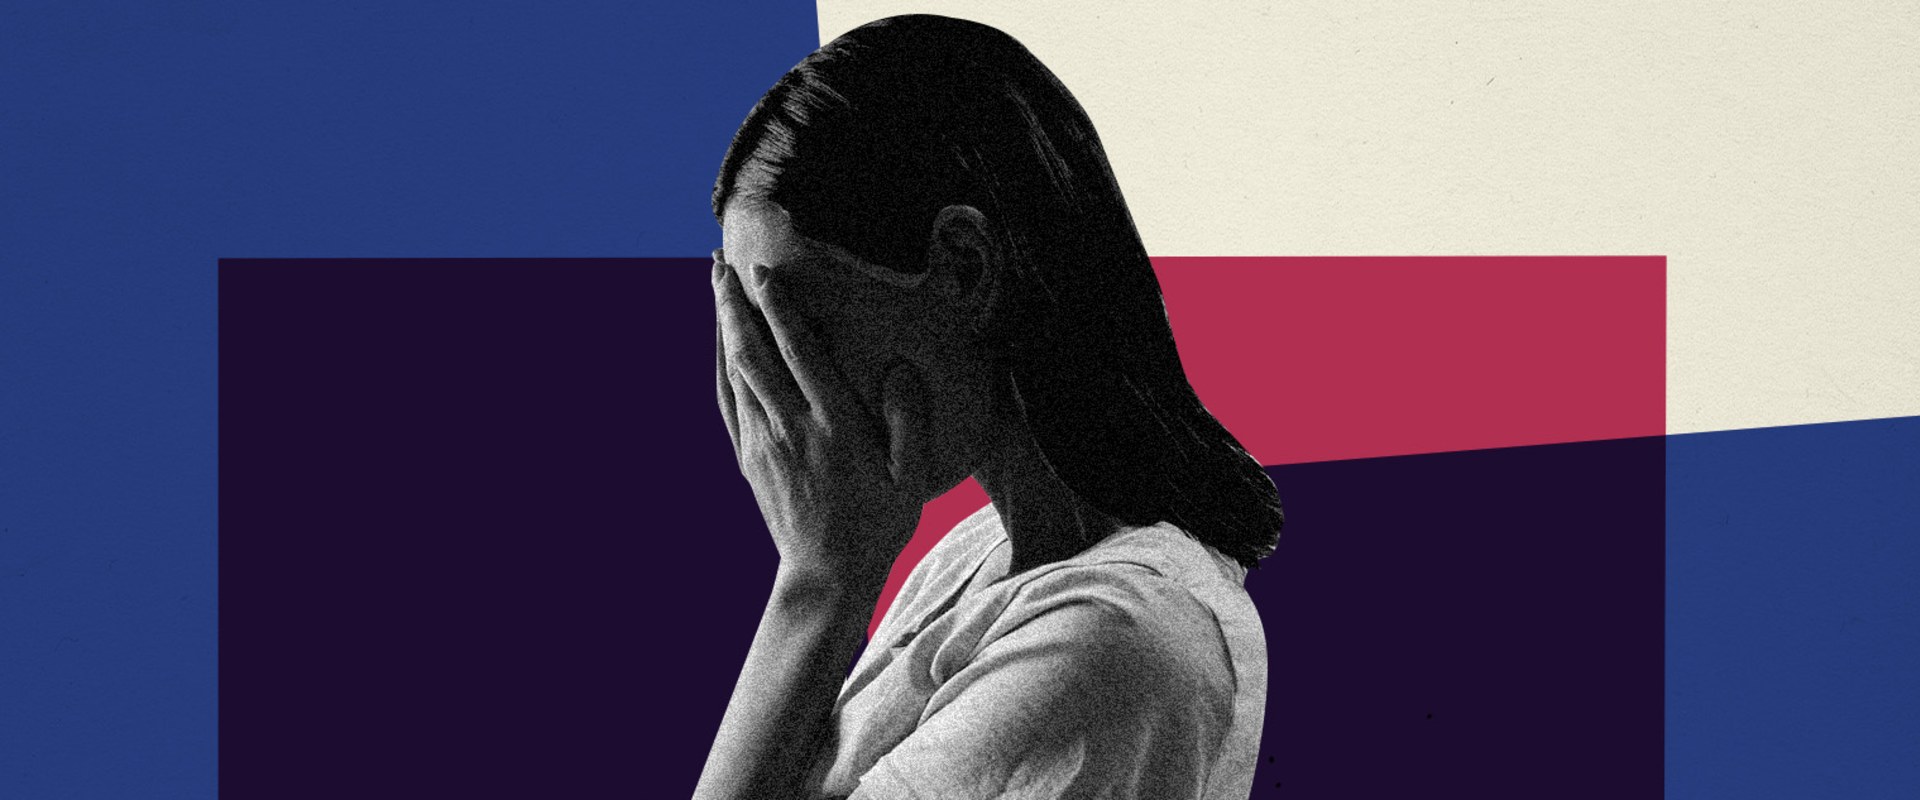 Why is Depression Diagnosed More in Women than Men?